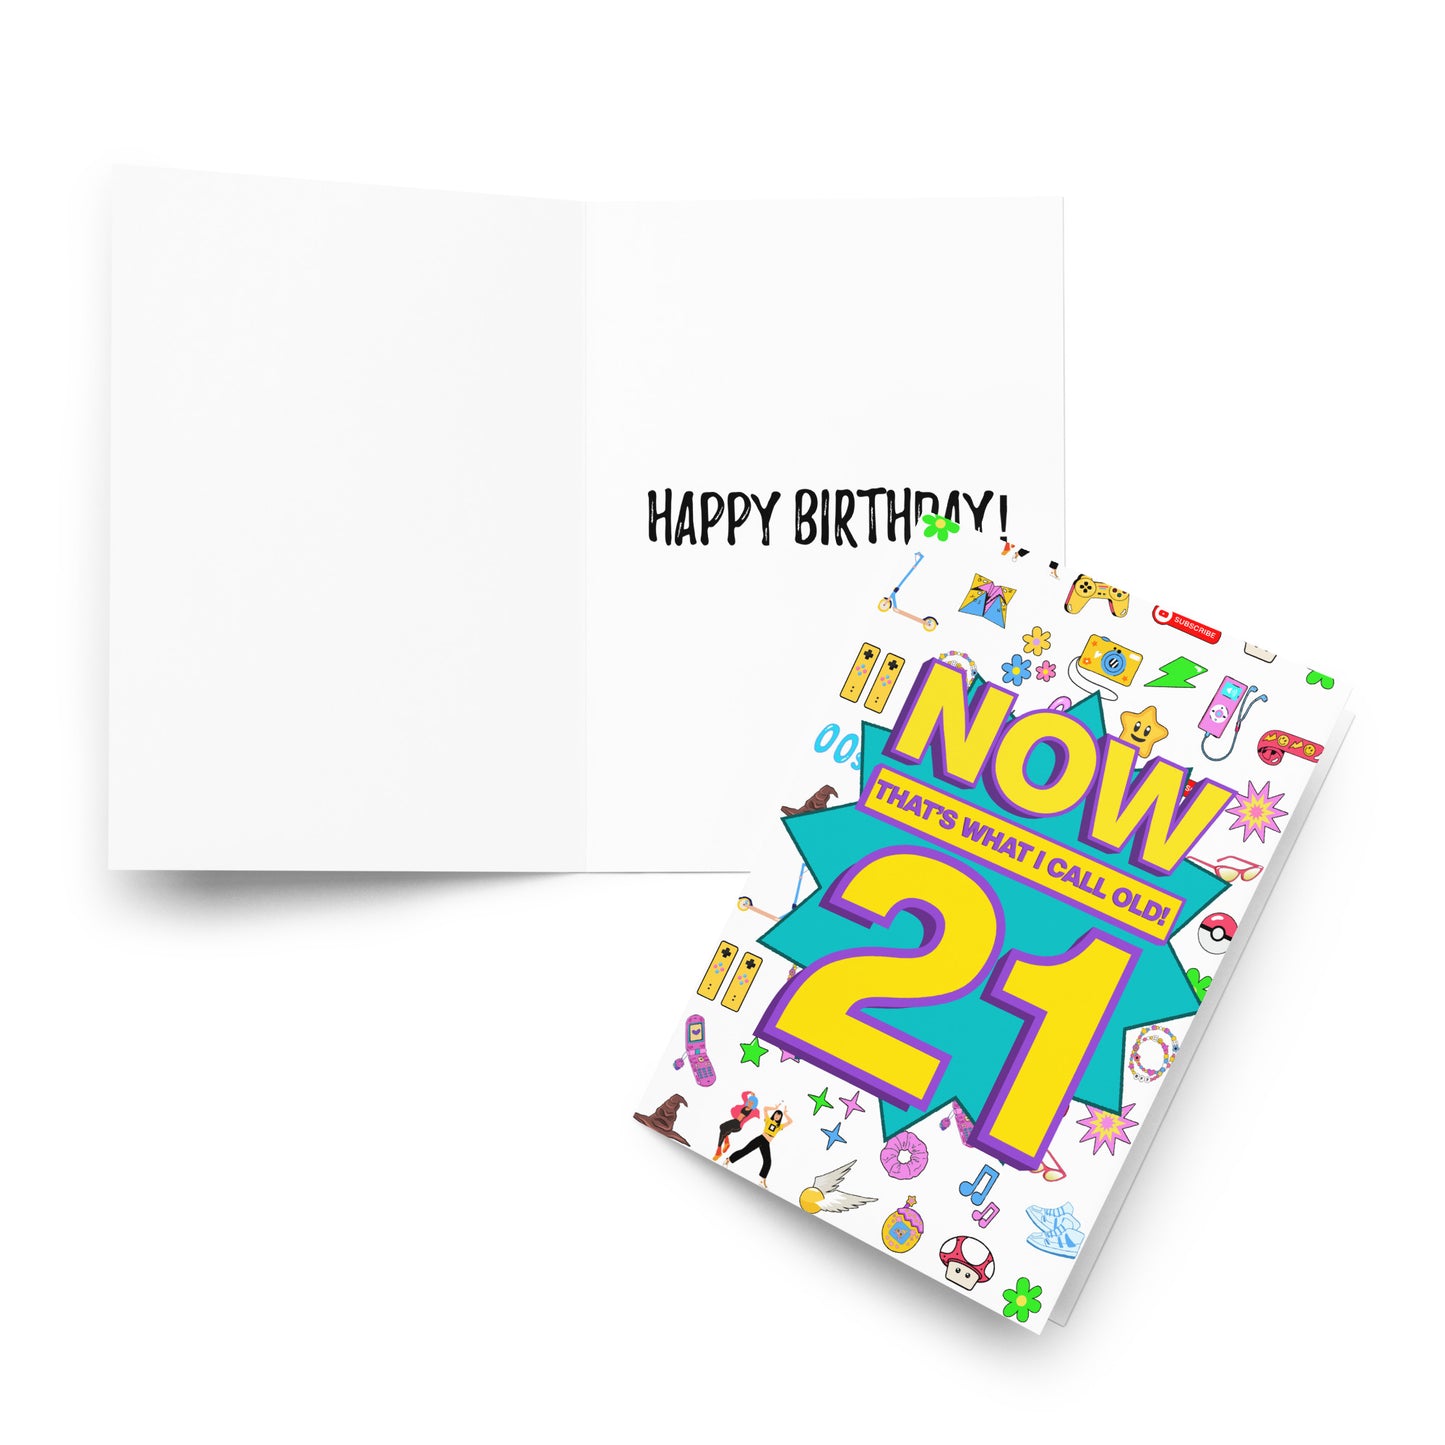 Funny 21st birthday card | now that's what I call old! A5 card | 21 years old